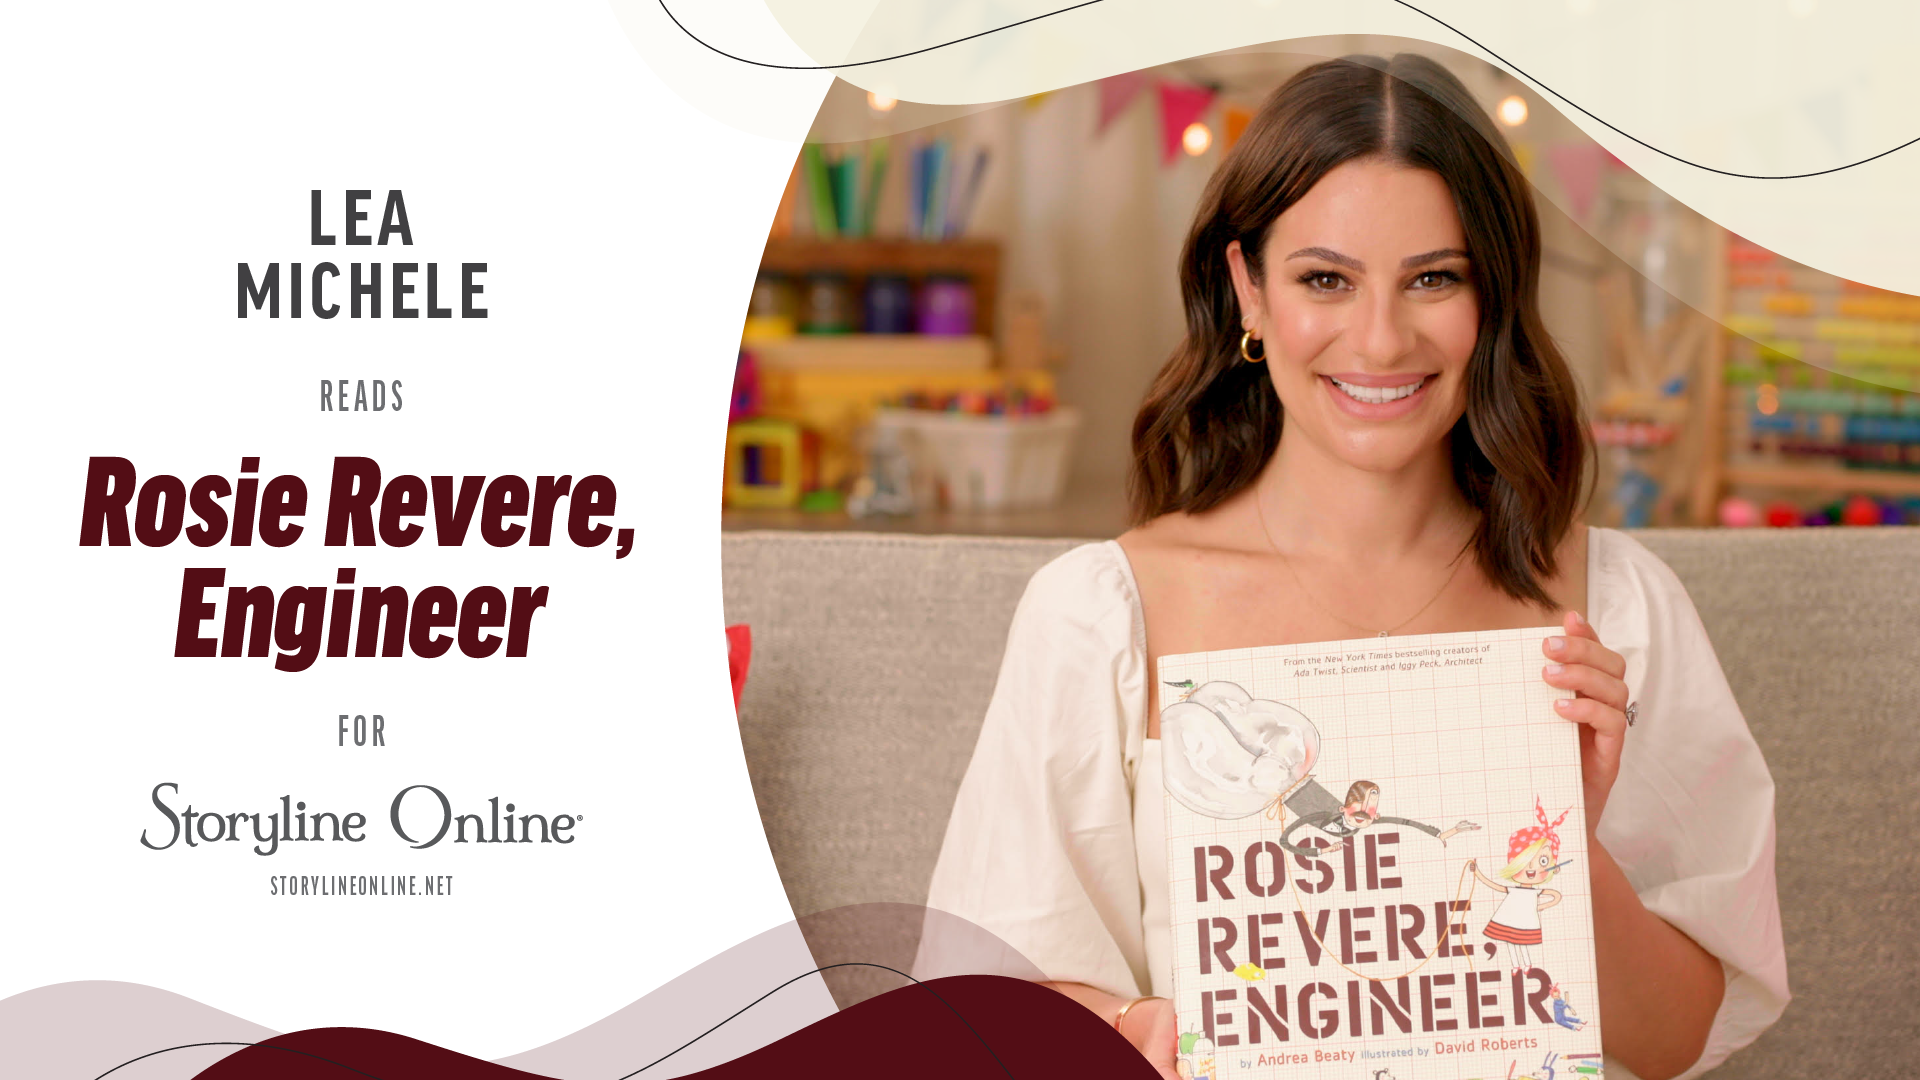 Actress And Funny Girl Star Lea Michele Reads Rosie Revere Engineer For The Sag Aftra Foundation S Storyline Online Sag Aftra Foundation